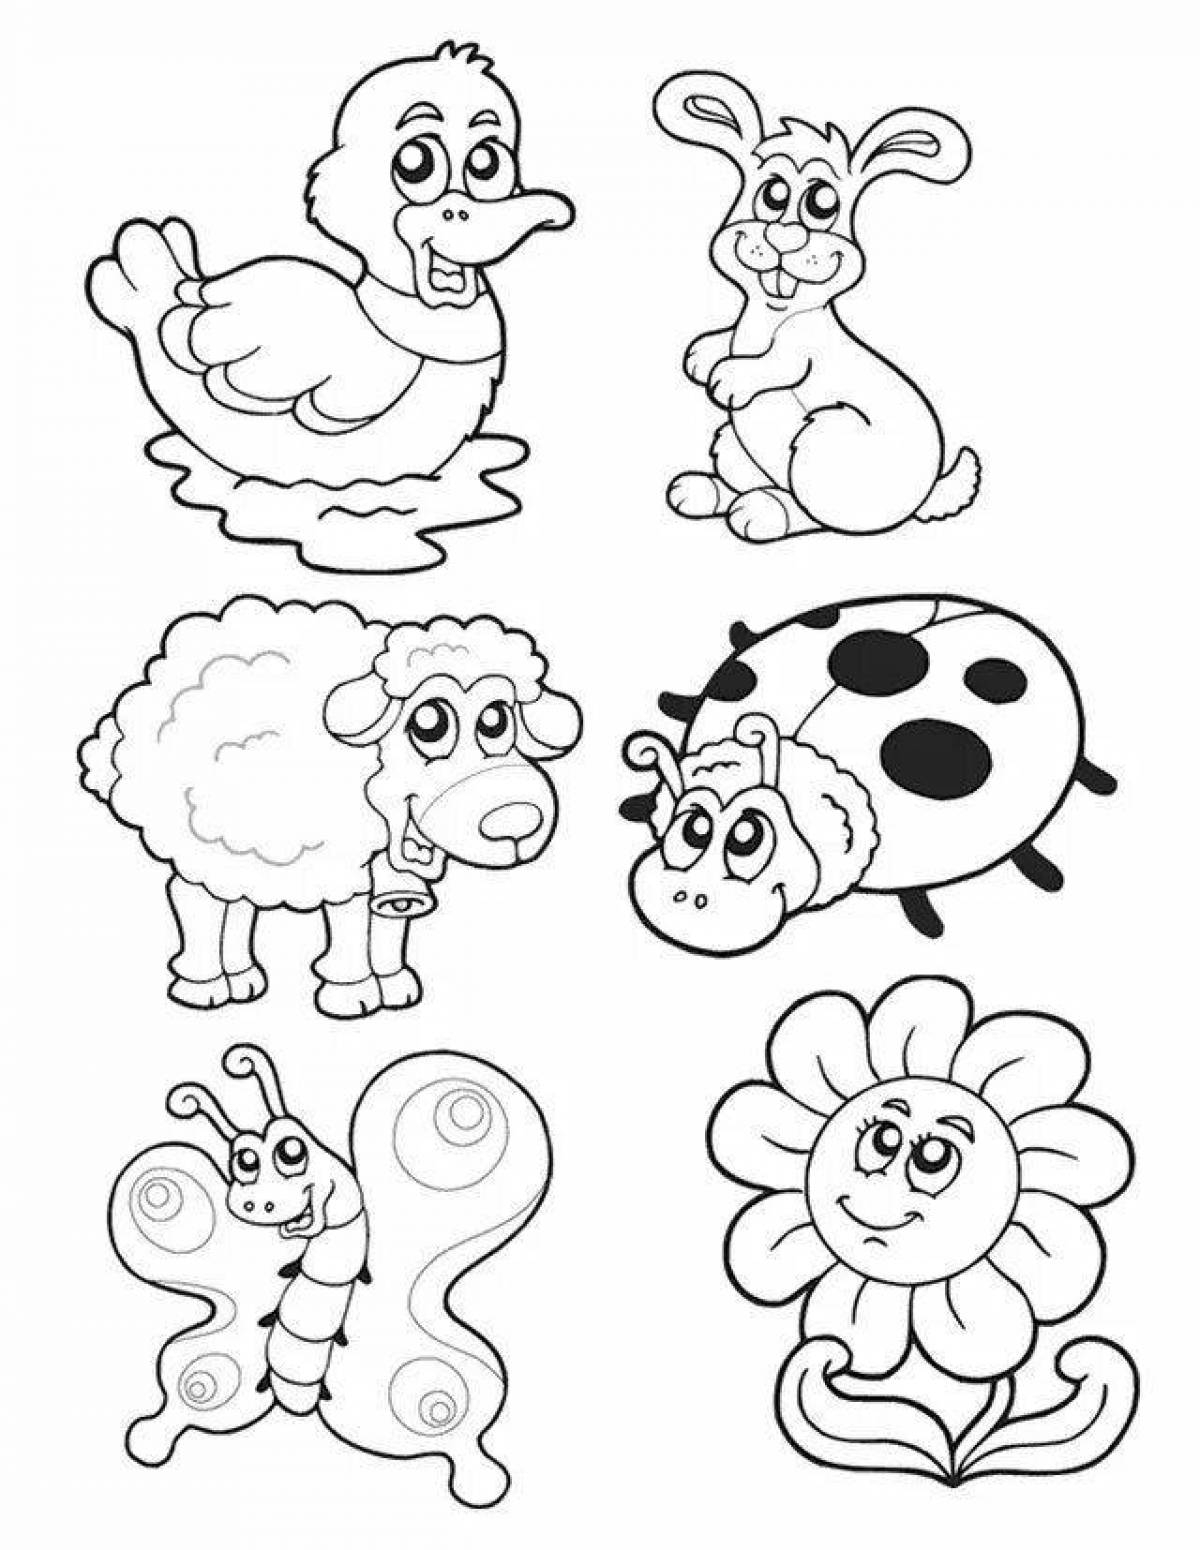 Color-frenzy printable coloring pages for kids in pdf format